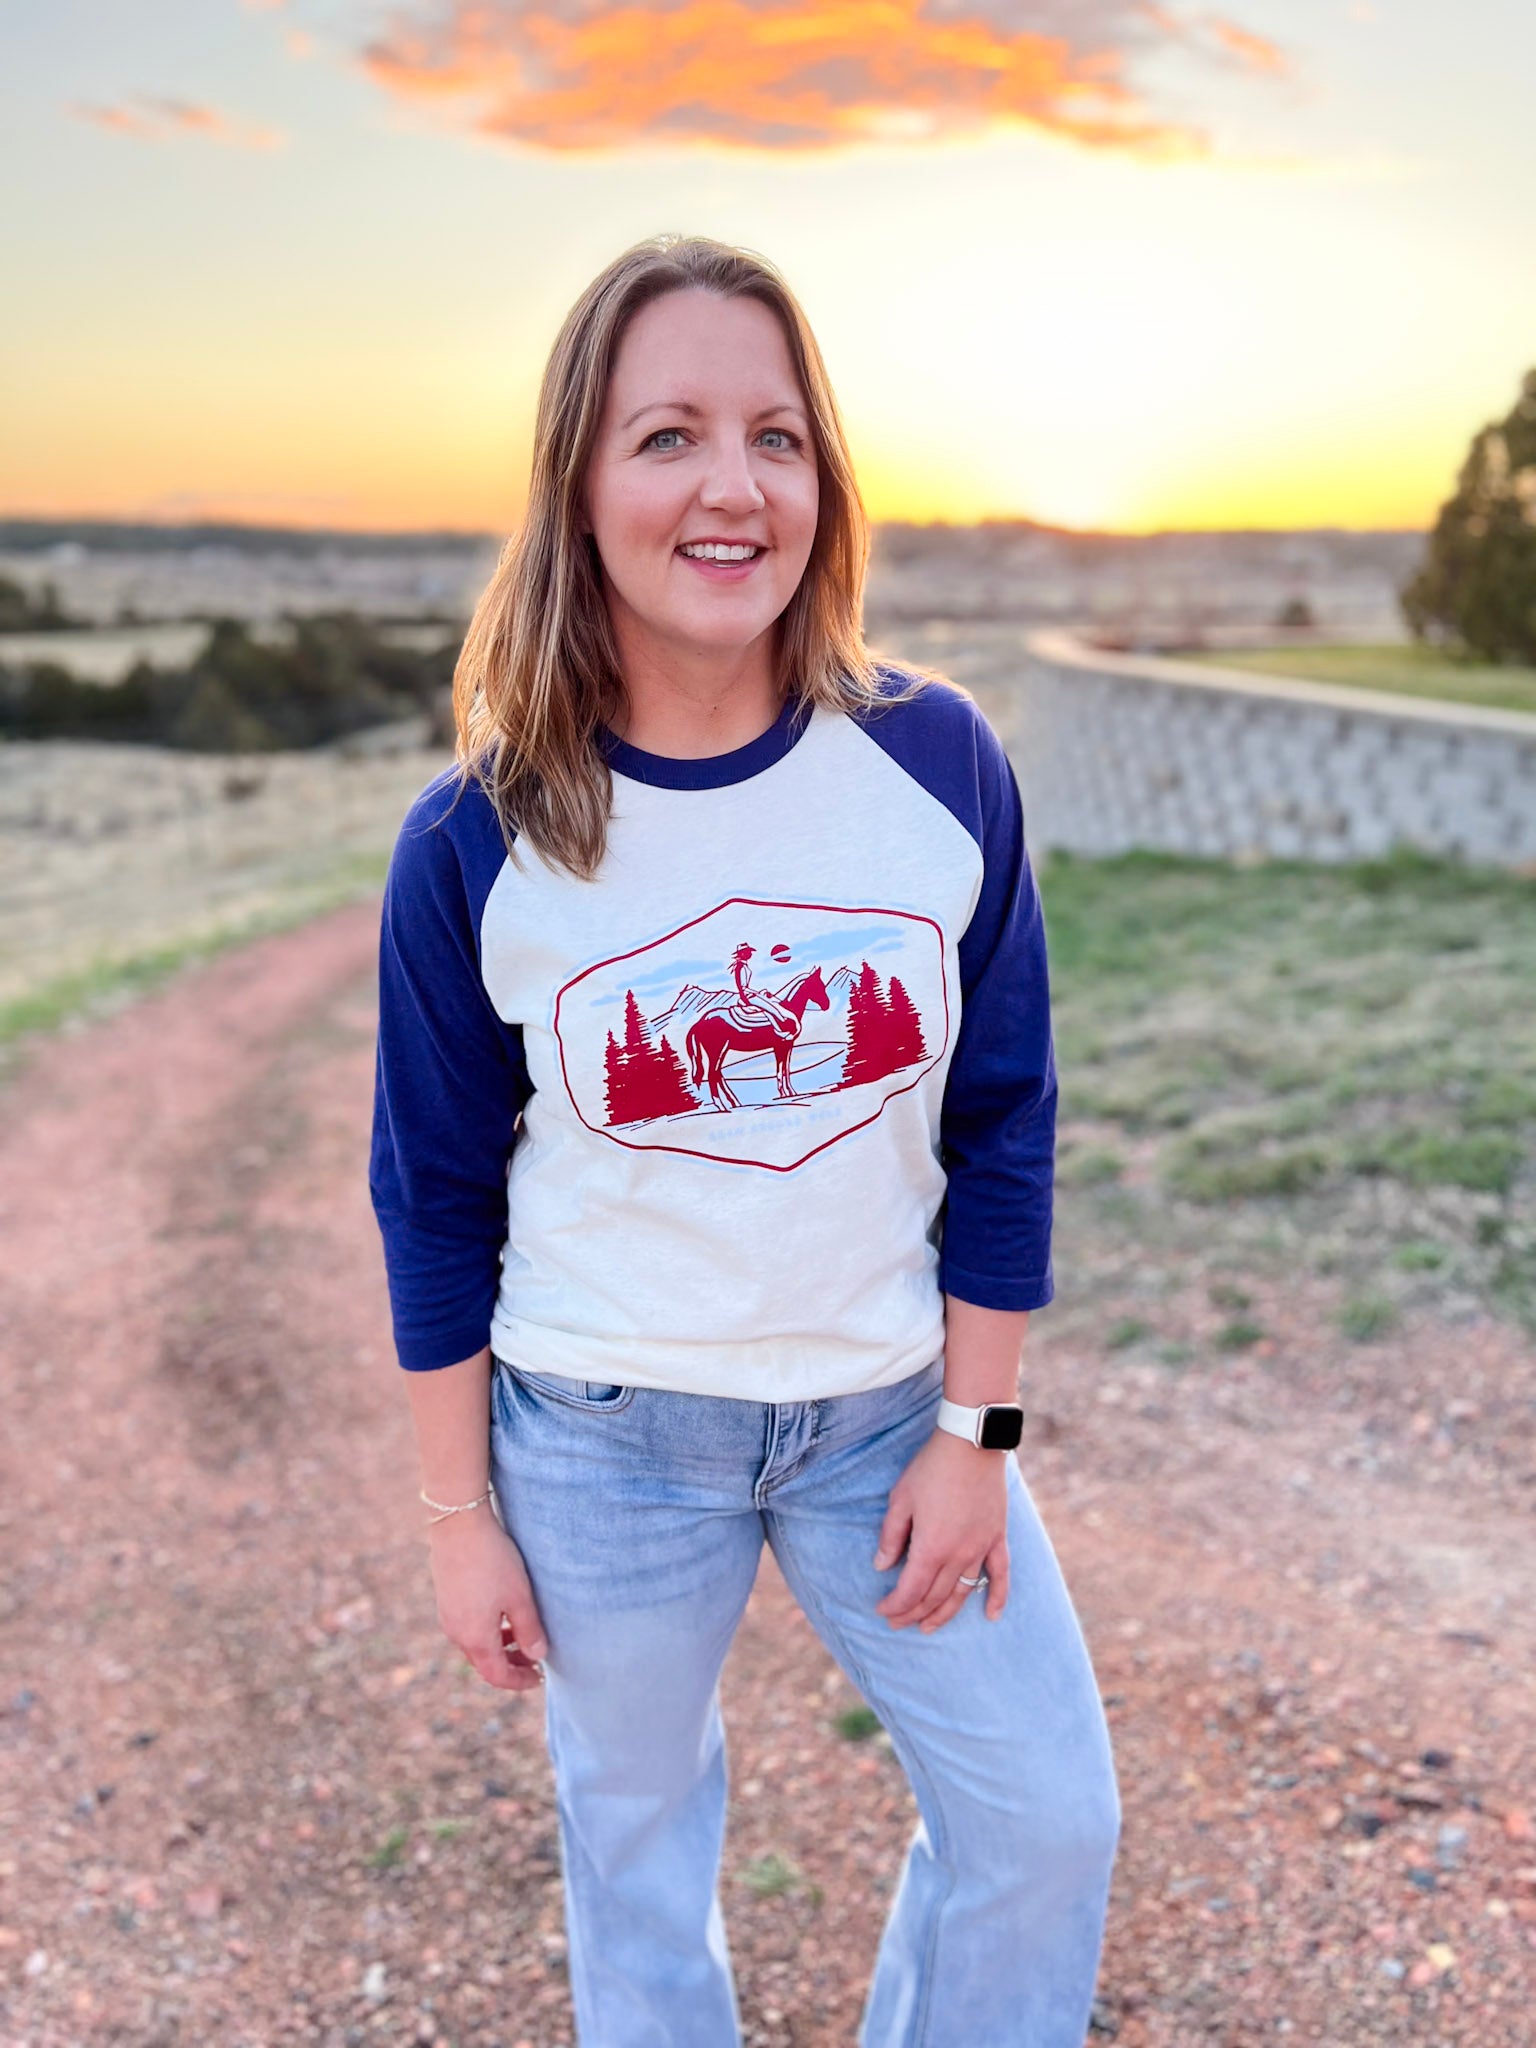 baseball sleeve raglan tee in navy and white with a cowgirl on horse rider imprint in burgundy and powder blue. Summer shirt. Western Americana. Wyoming Americana. Roam Around Wear is a Wyoming t-shirt company based out of Gillette, Wyoming